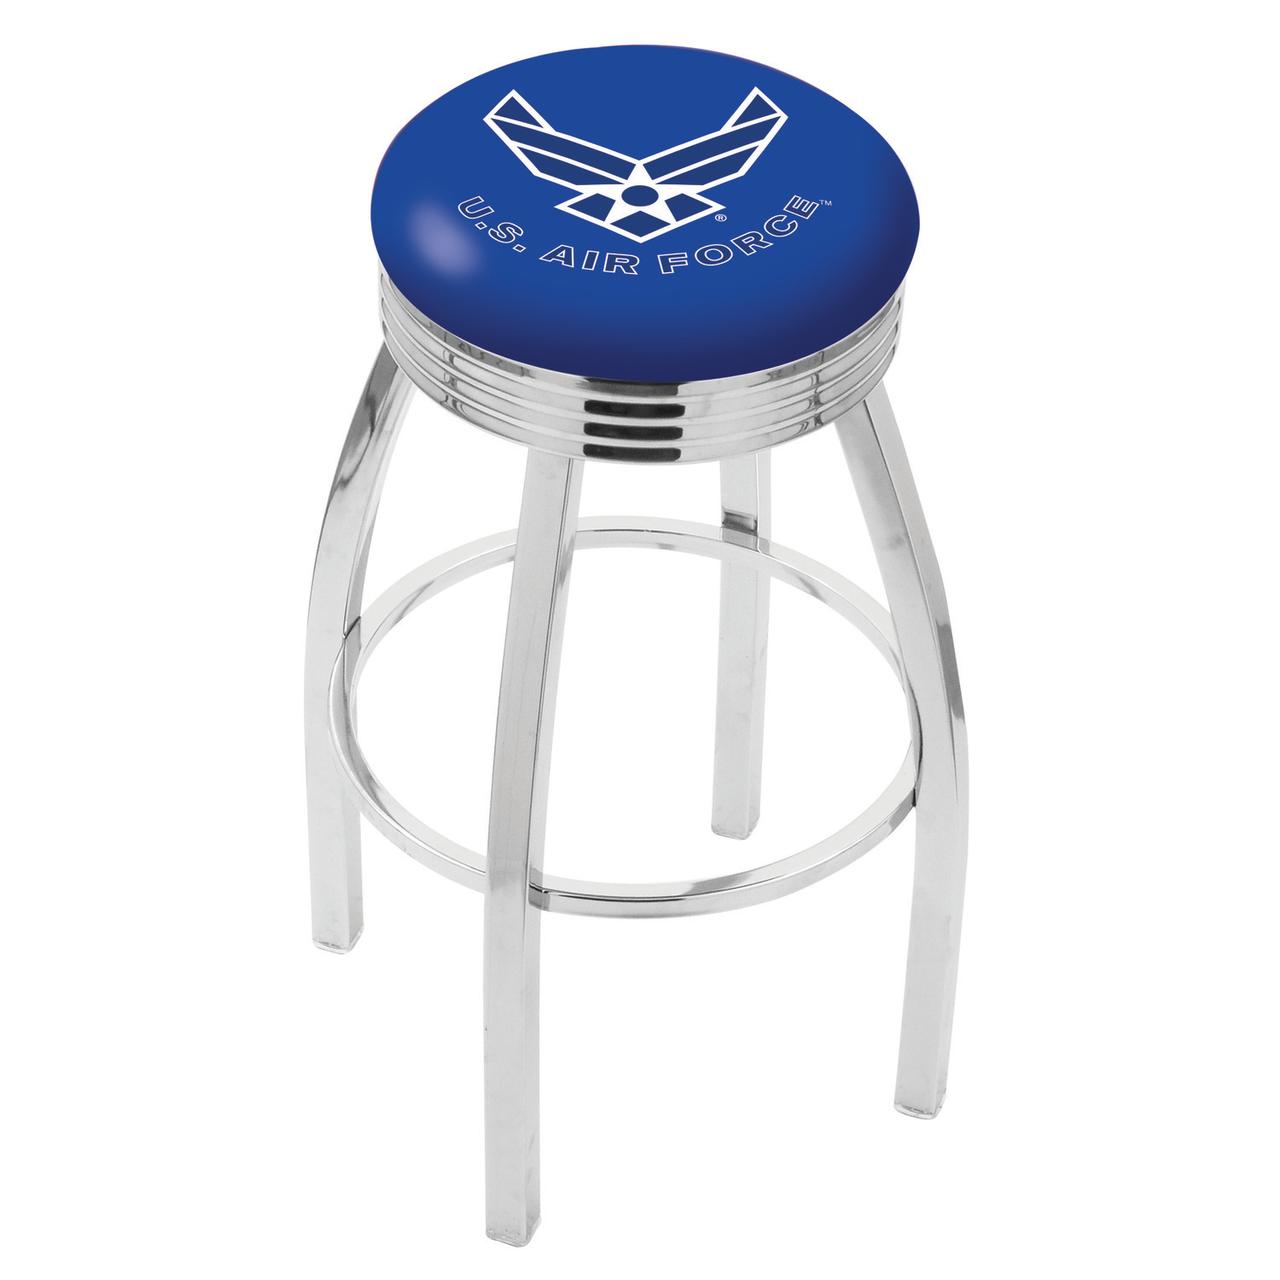 30" L8C3C - Chrome U.S. Air Force Swivel Bar Stool with 2.5" Ribbed Accent Ring by Holland Bar Stool Company - image 1 of 6